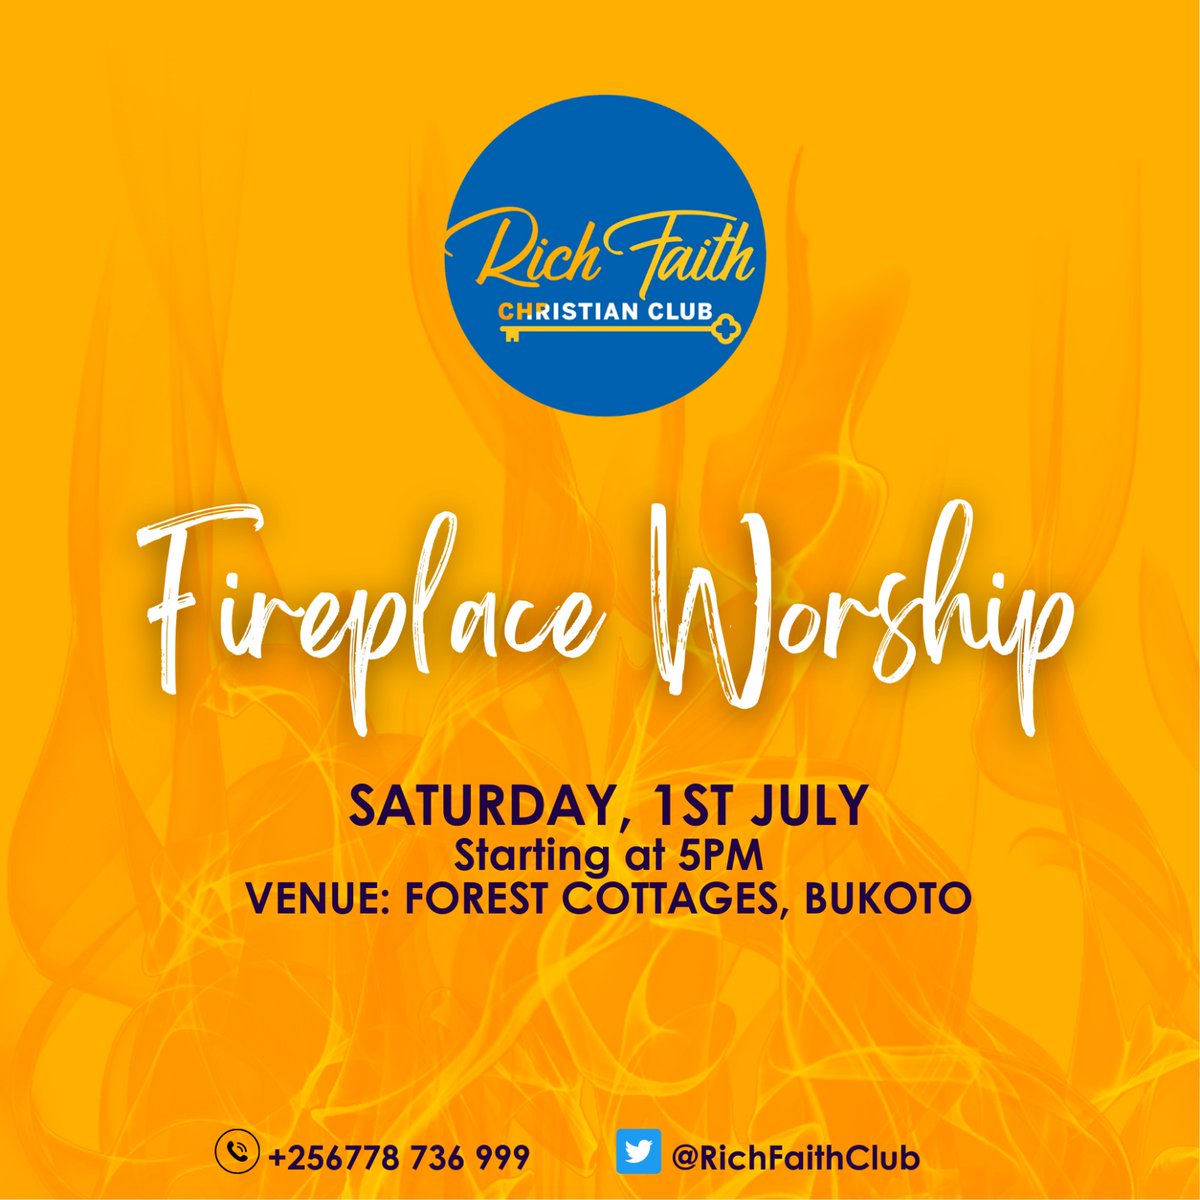 I have thinking about time where does it go, may be I can make change singing oh oh show what matters keep my eyes open  for I don't want to miss what you have for me on this day #fireplaceworship @RichFaithClub @HaroldTurijay @Patrick_tshingu